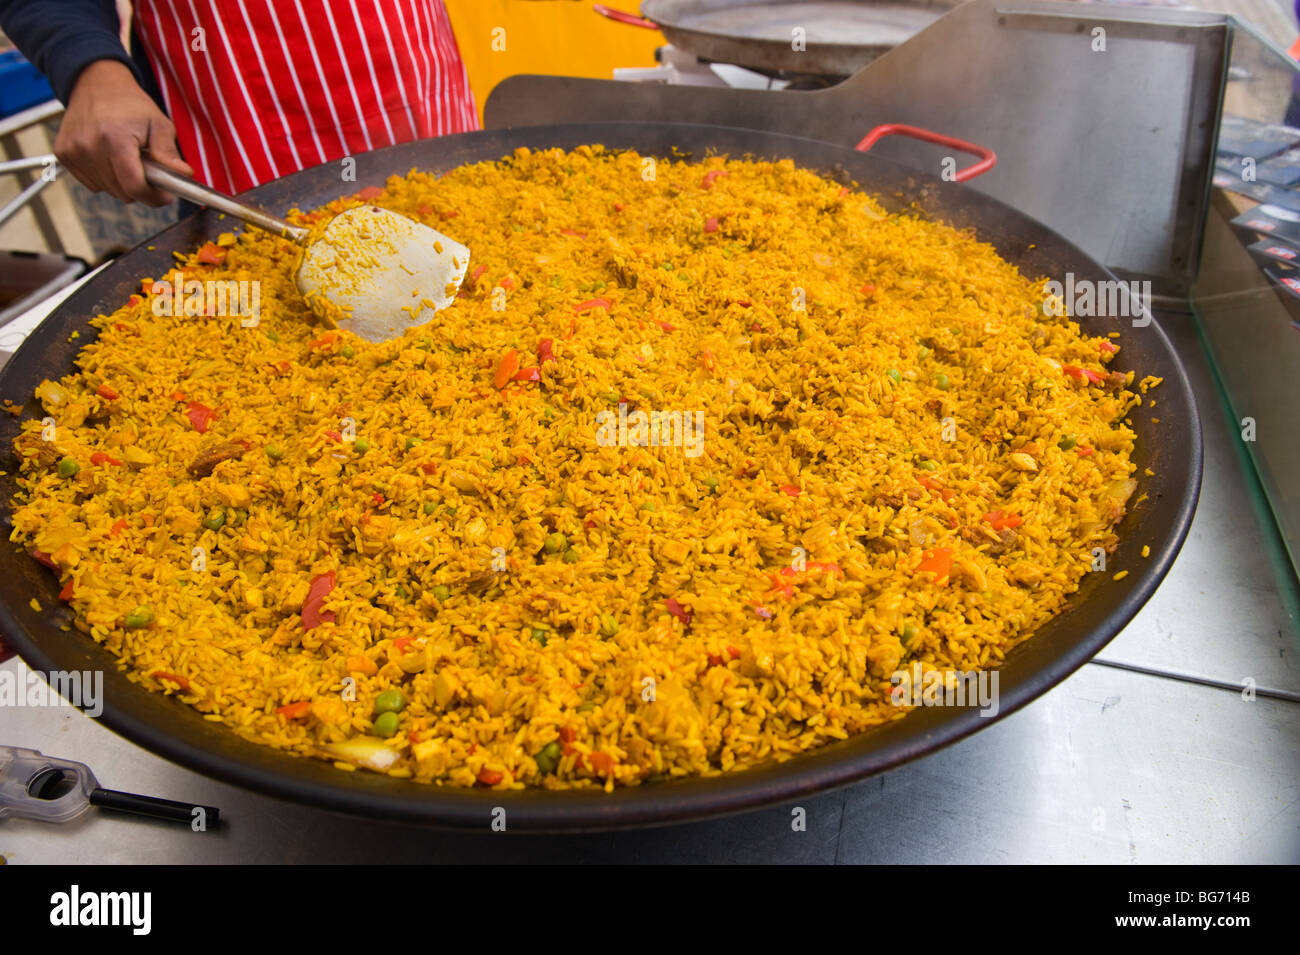 Steamy hot paella being cooked on market stall at Usk Winter Festival Usk Monmouthshire South Wales UK Stock Photo